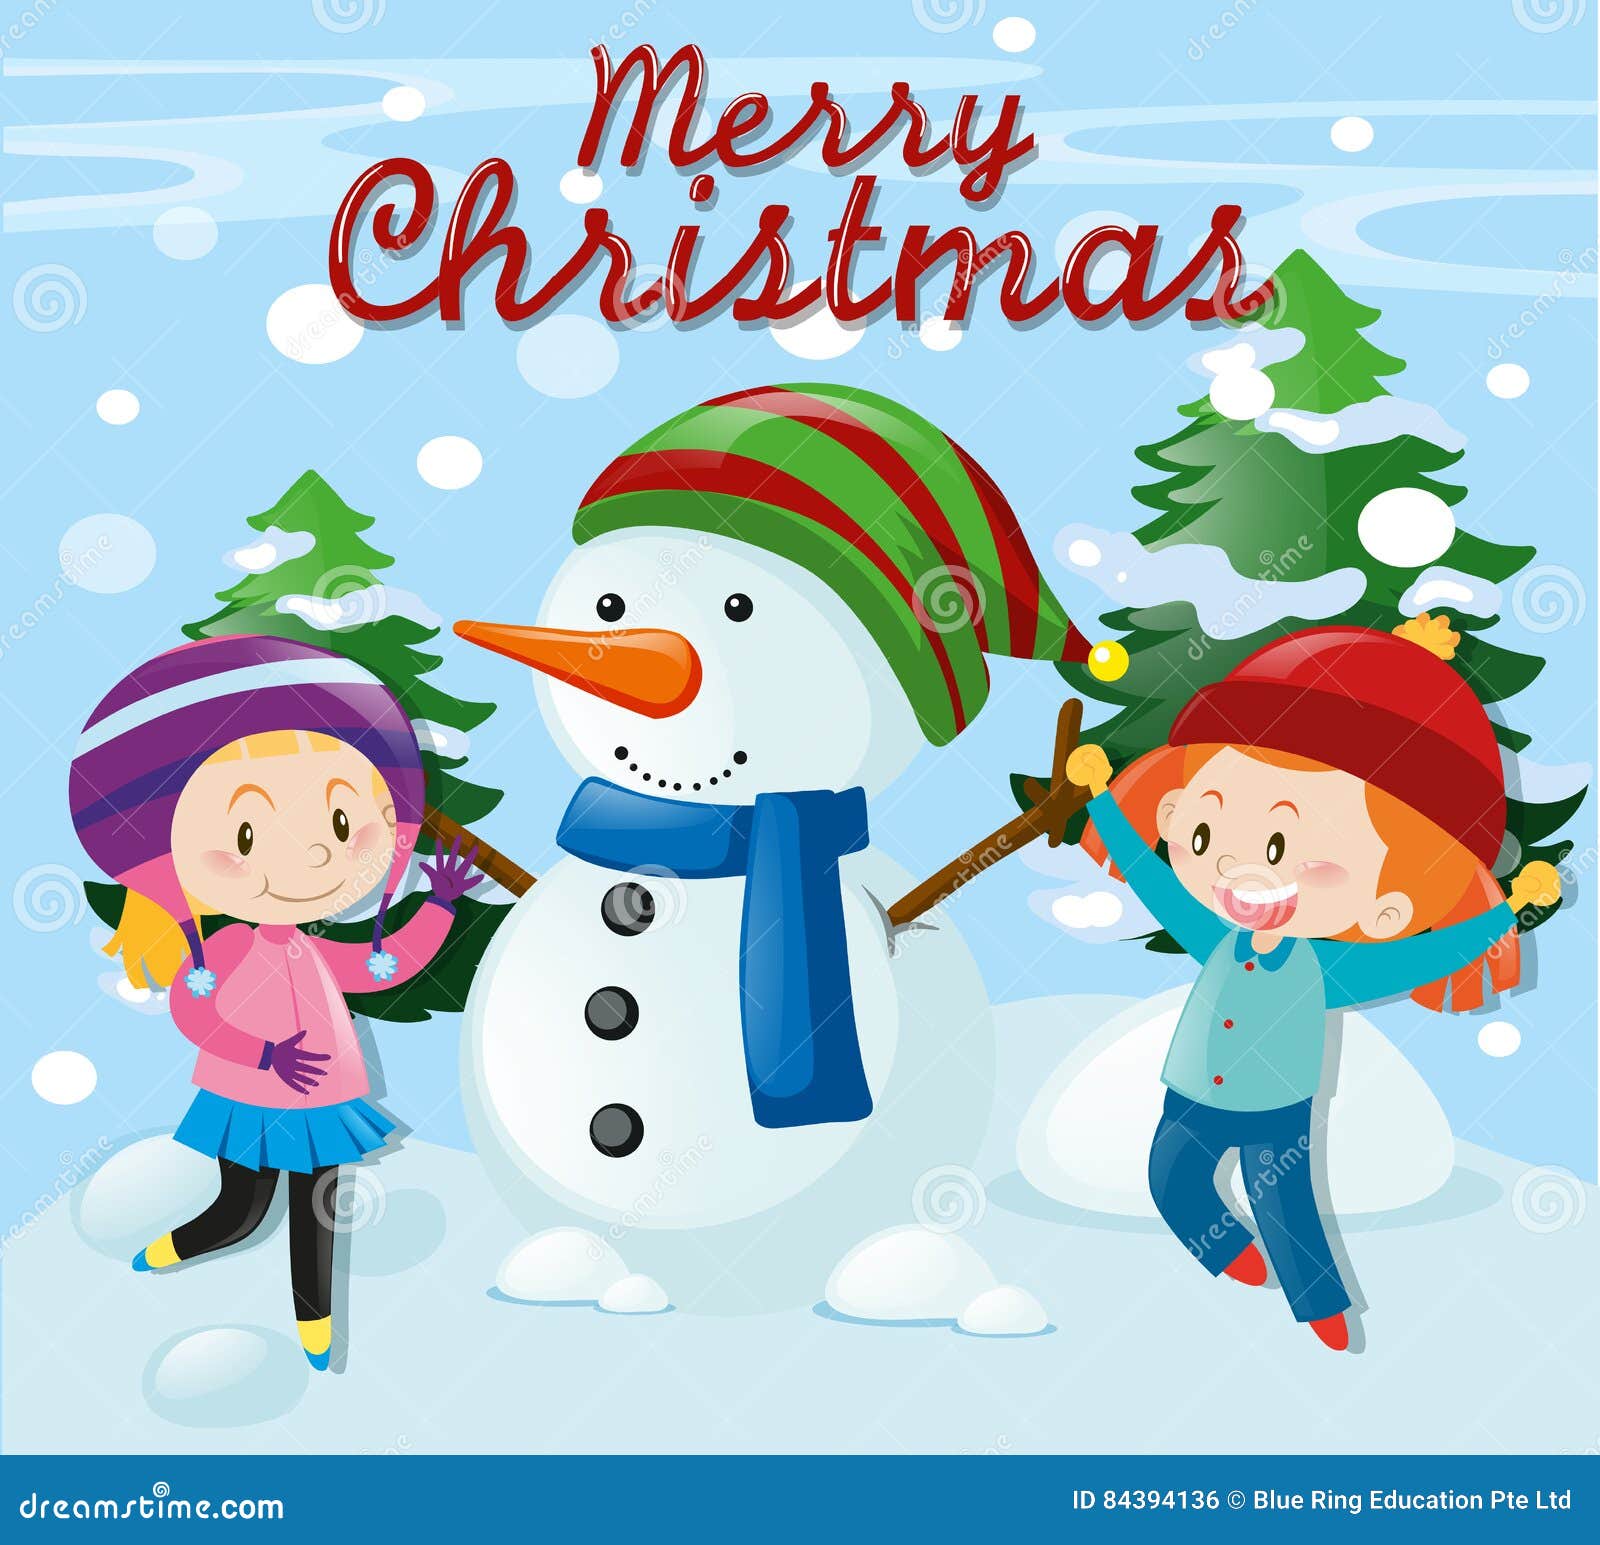 Christmas Theme with Girls and Snowman Stock Vector - Illustration of ...